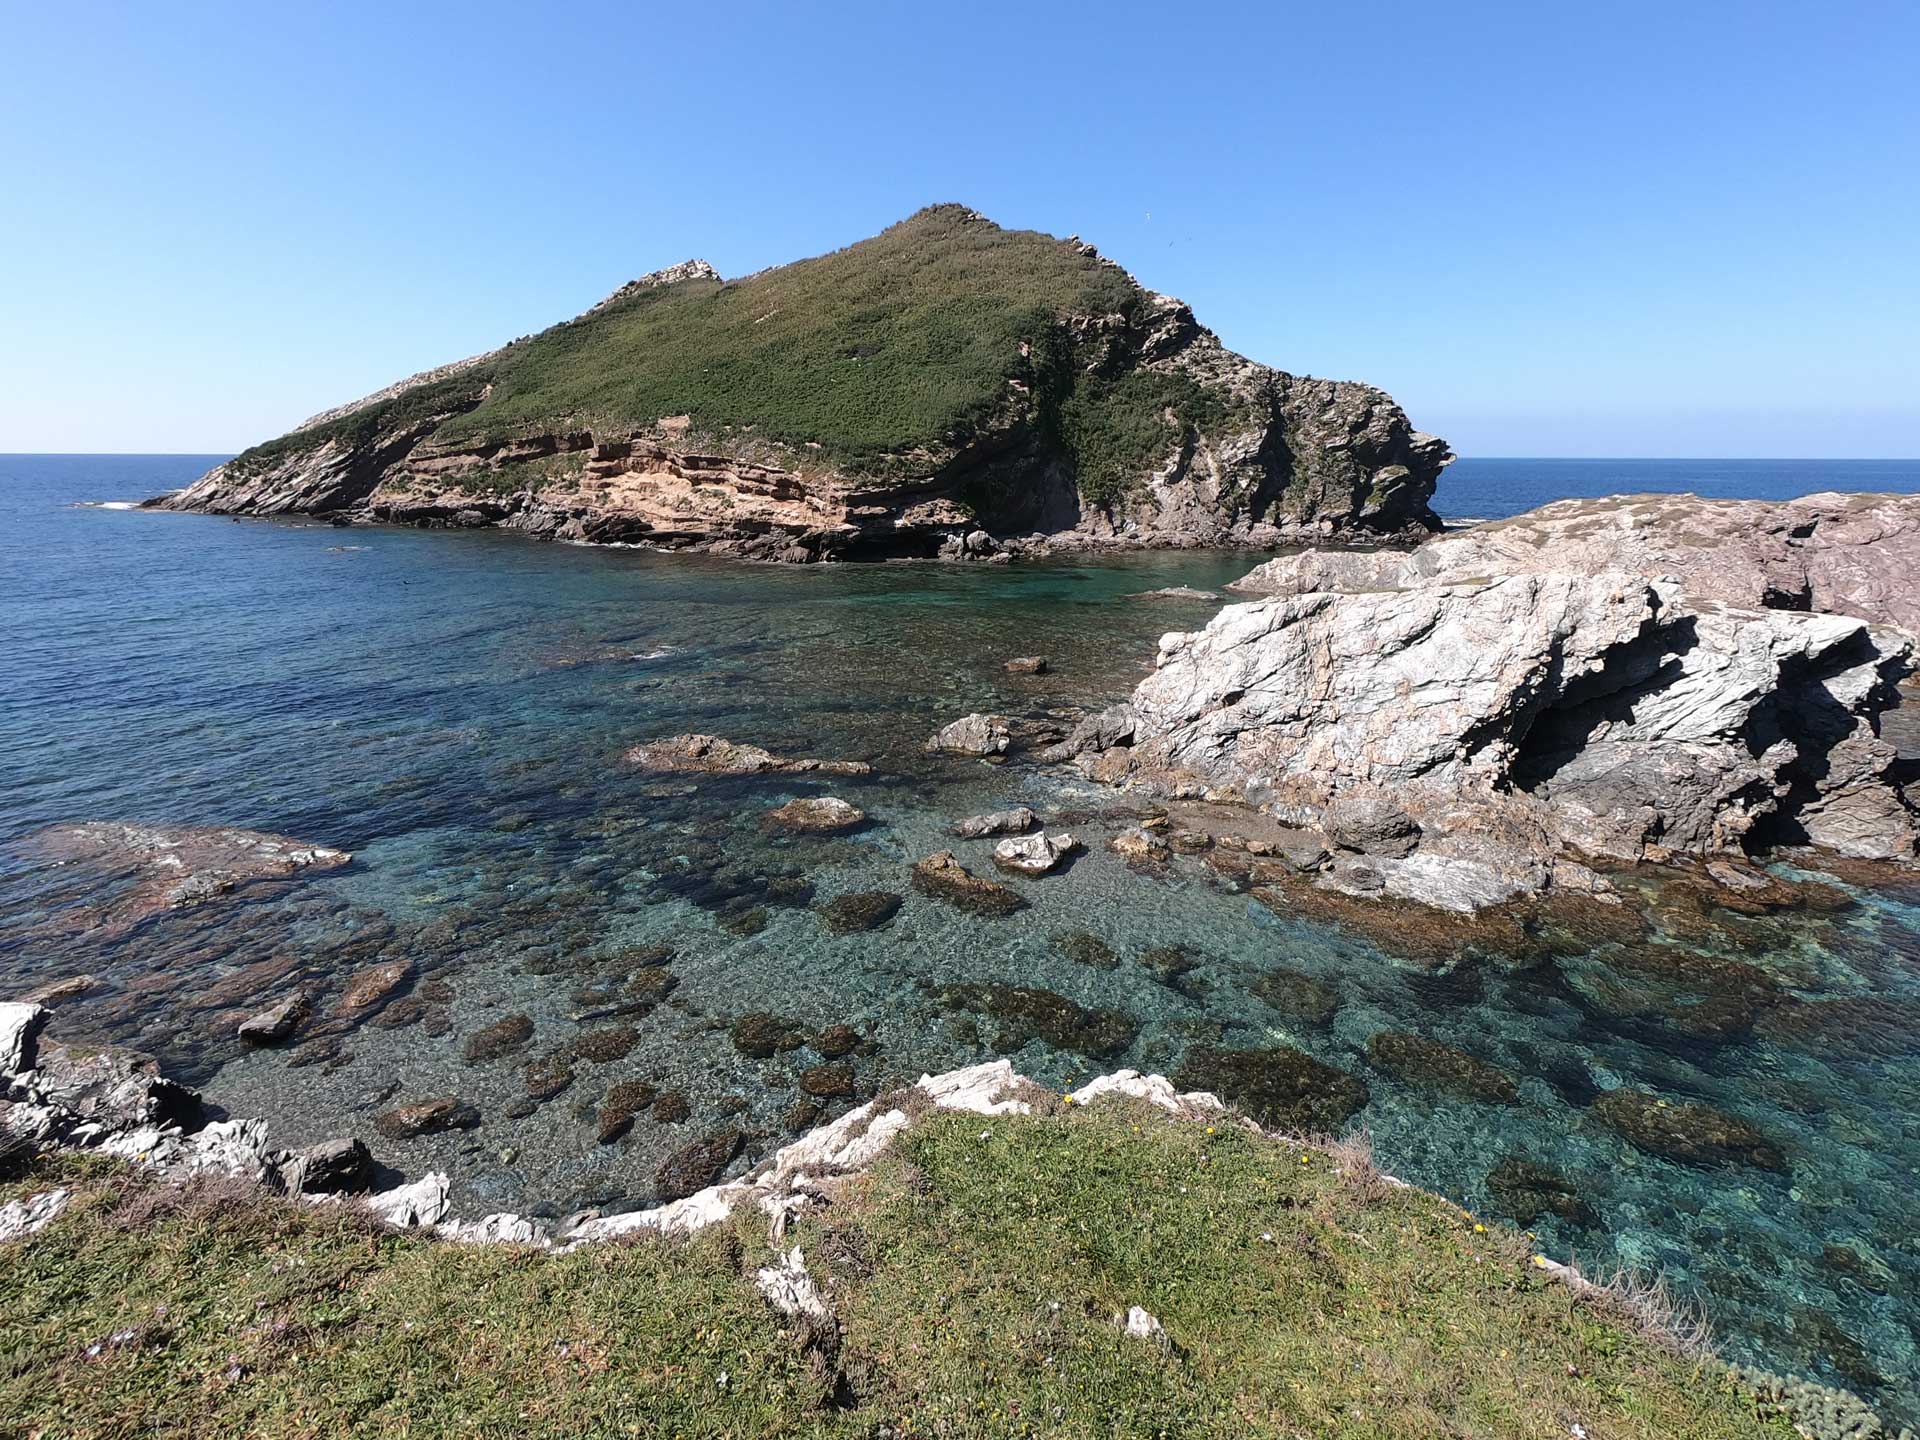 Crystal clear sea in the territory of Alghero